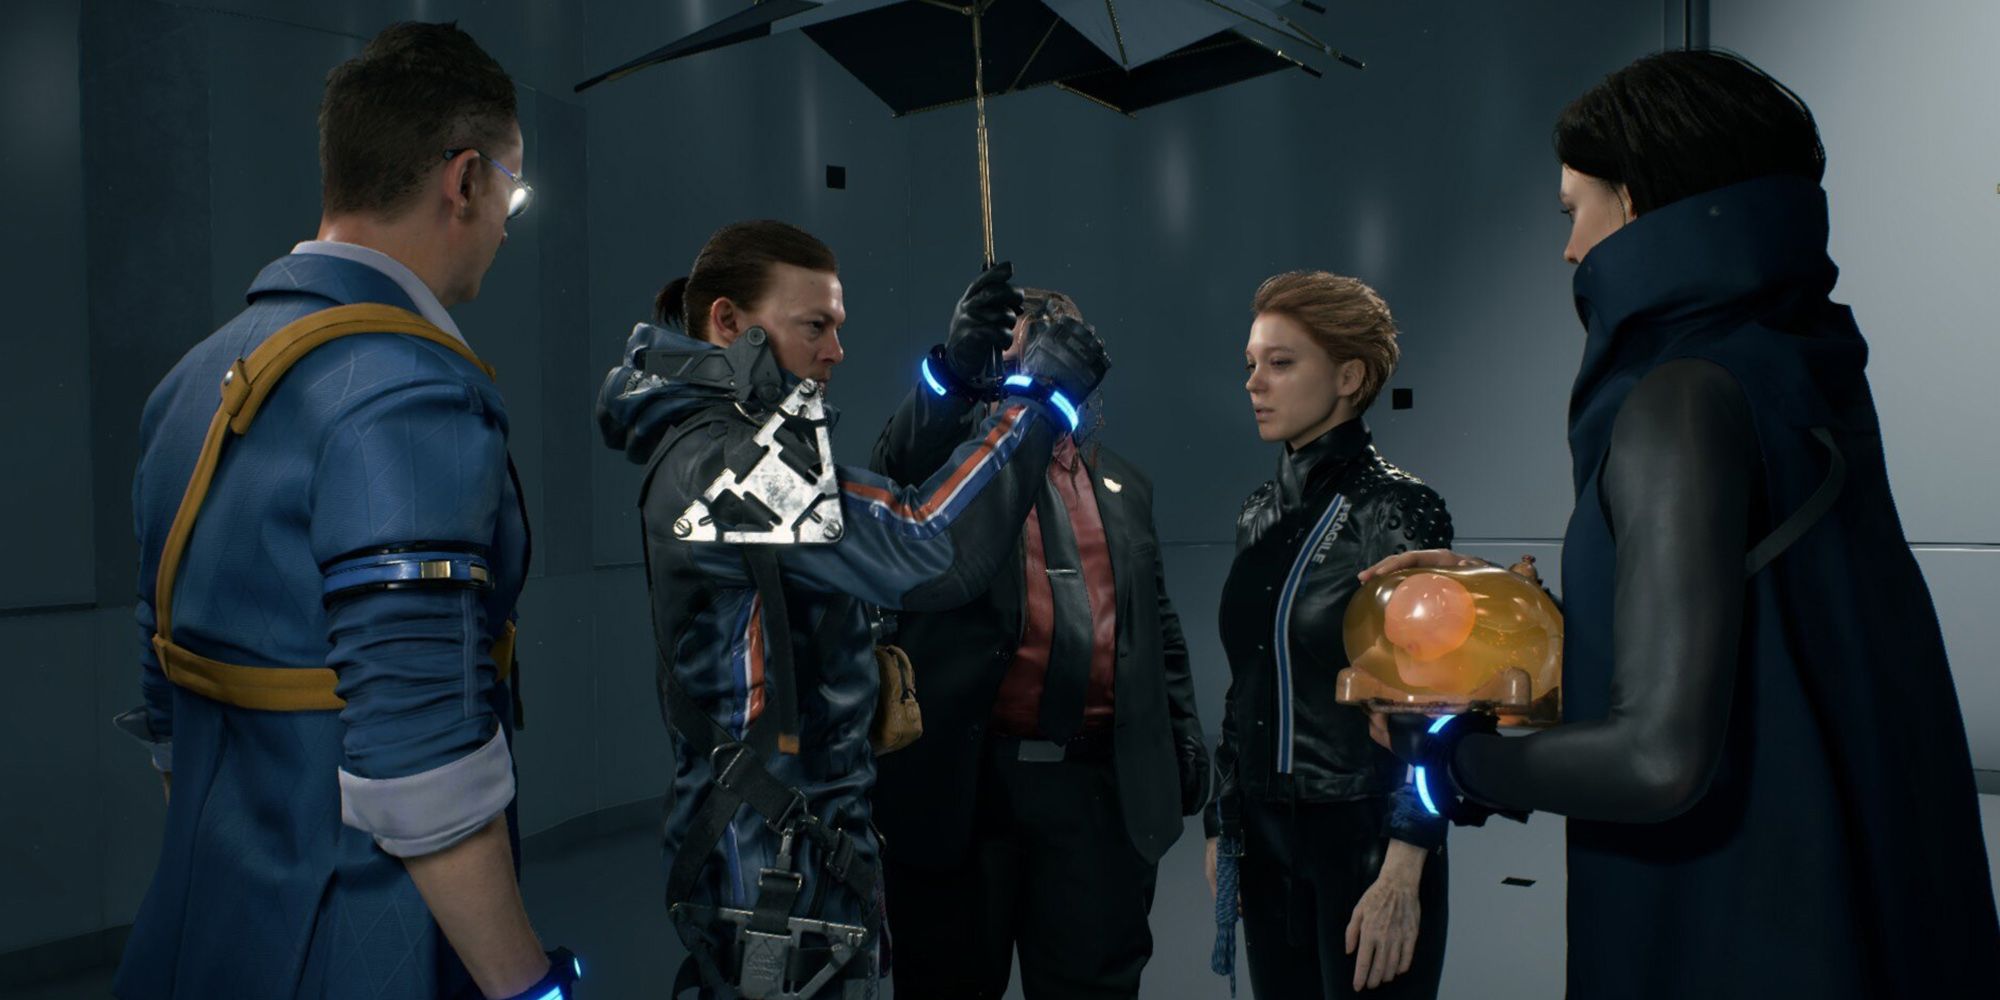 Death Stranding - Most Of The Main Cast Standing Together During The Latter Cutscenes In The Game